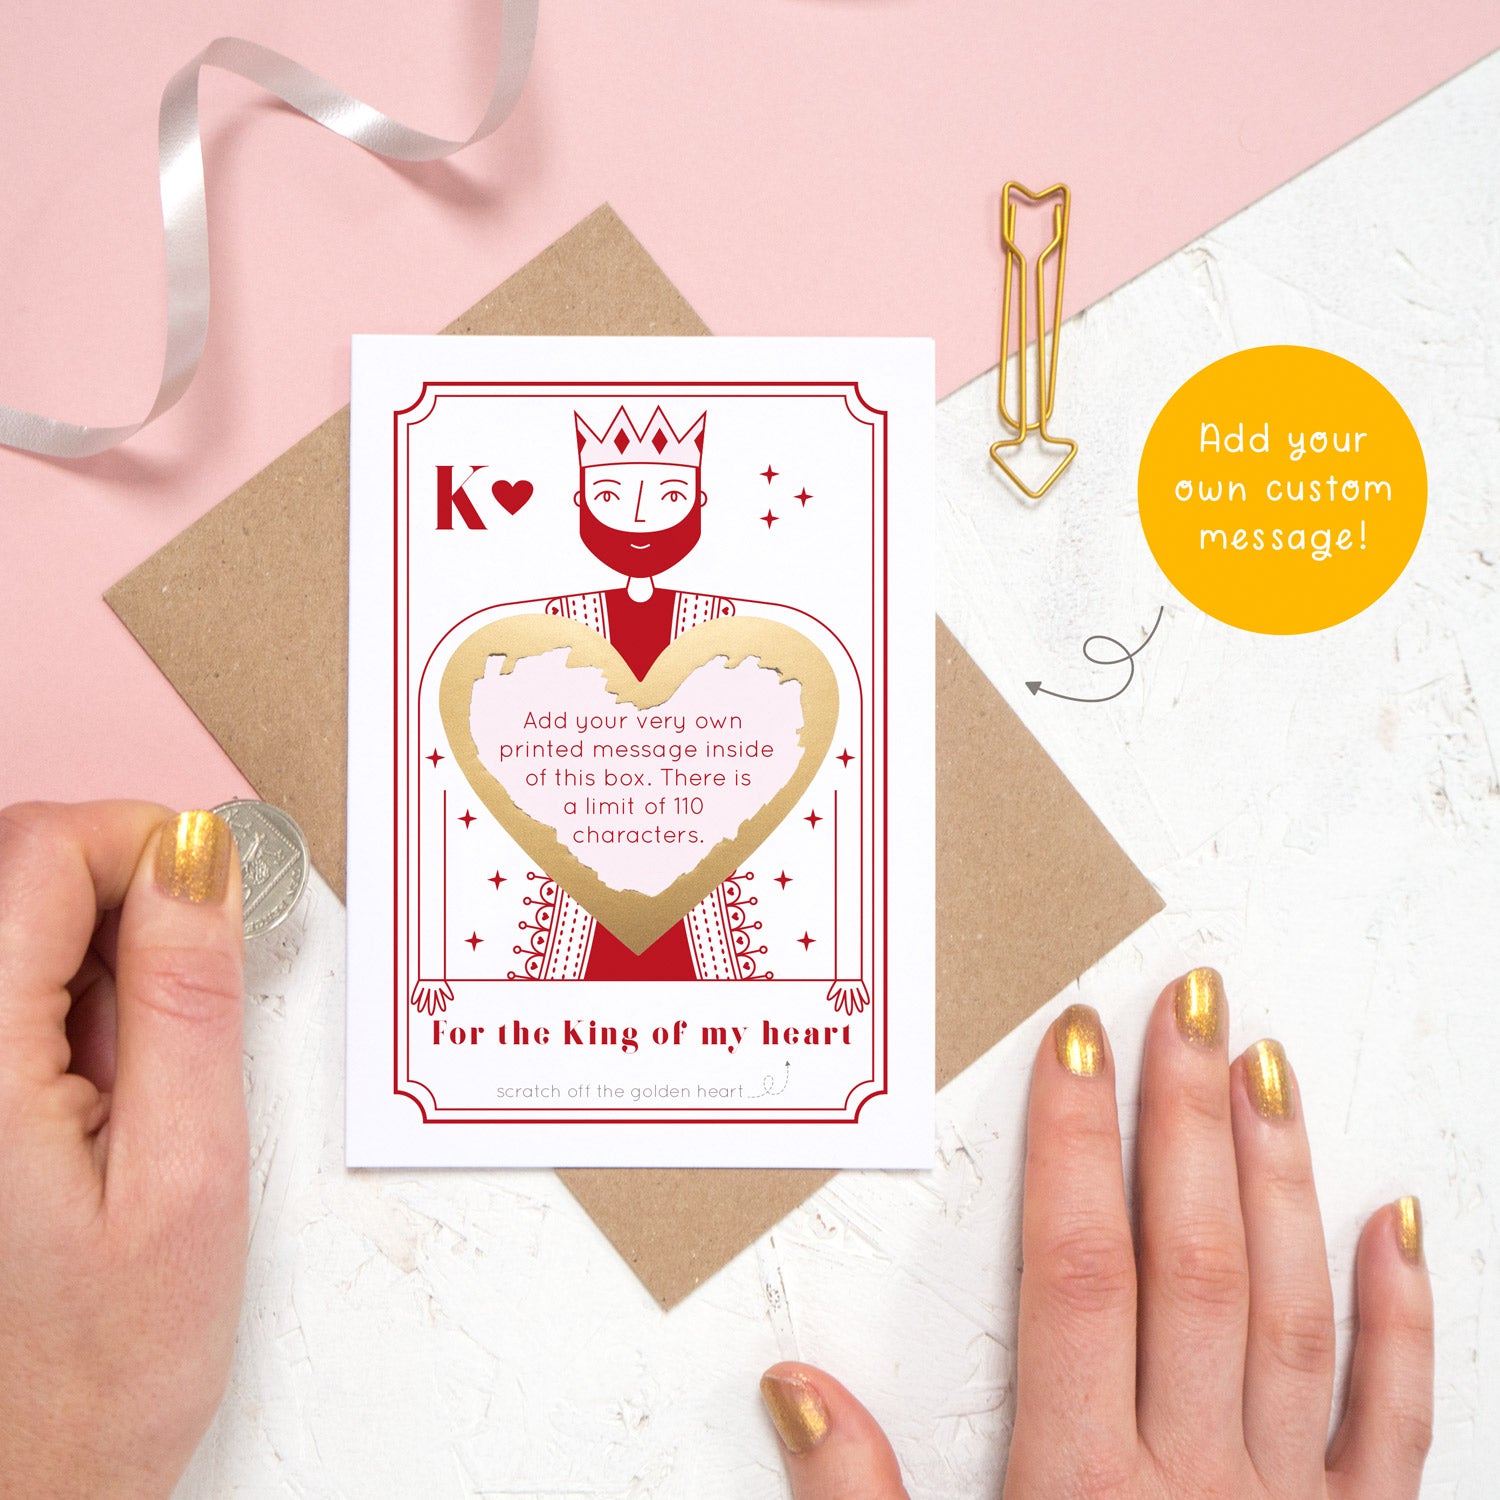 A custom king of hearts scratch card shot on a pink and white background with a scratched off heart with a custom message